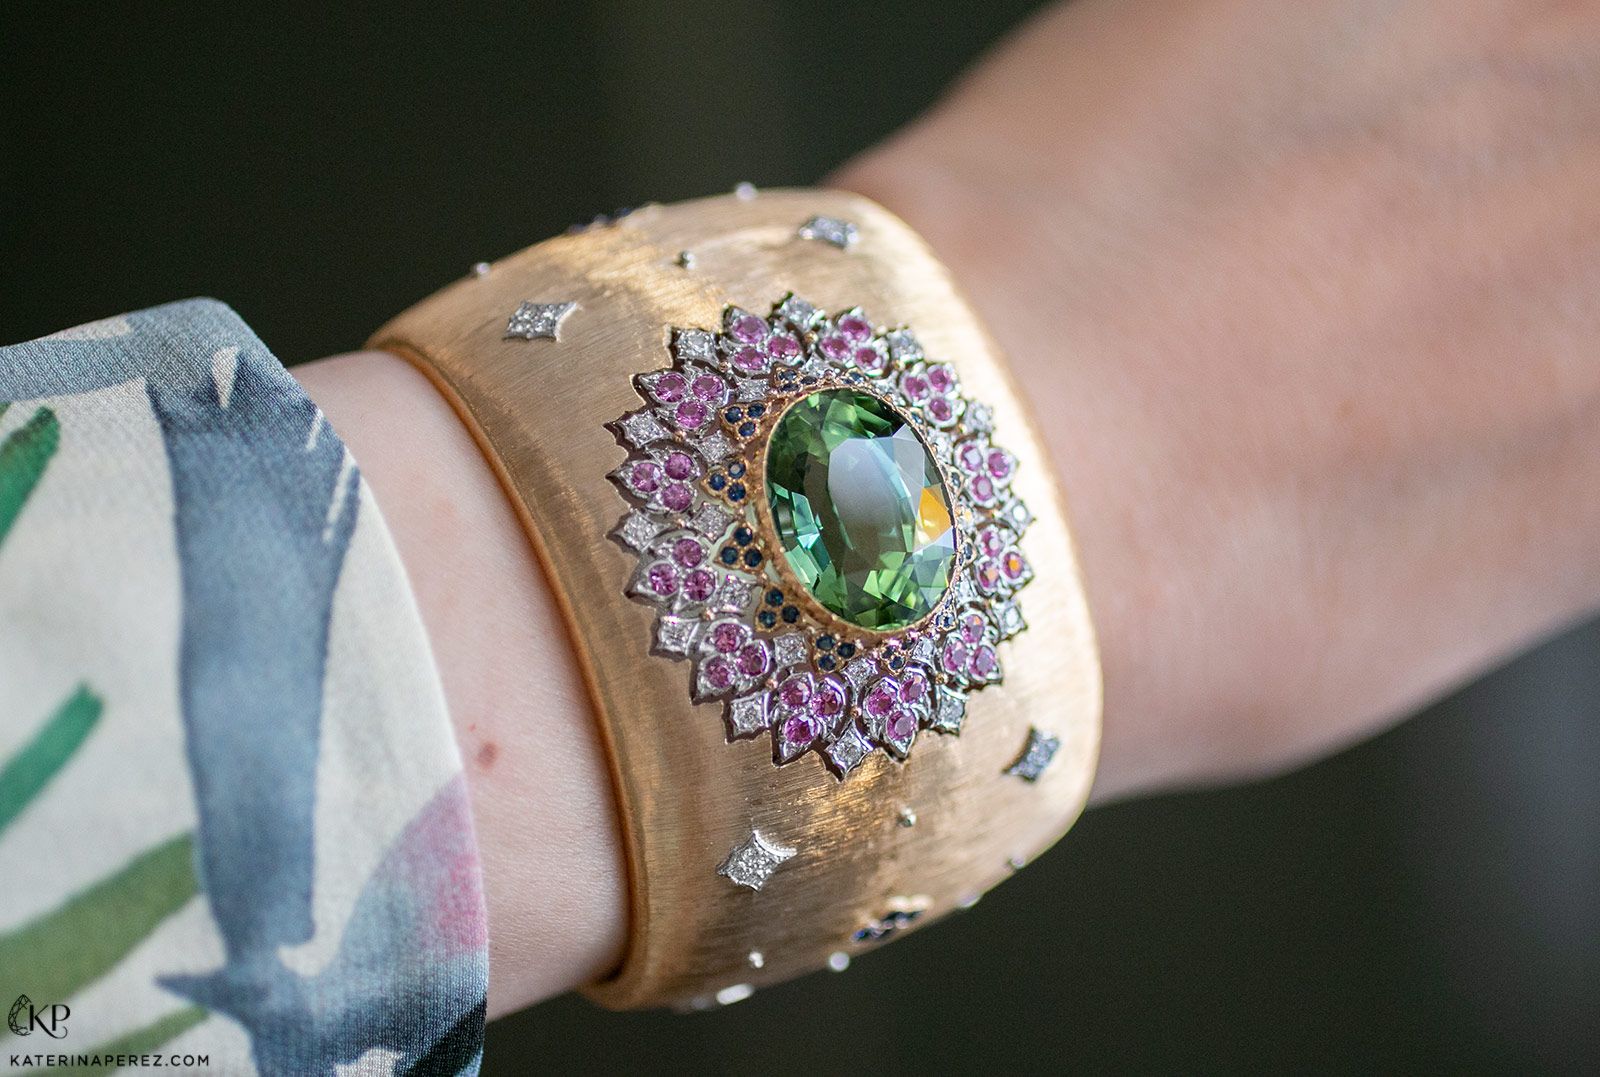 The Buccellati Lilium cuff bracelet with diamonds, pink and blue sapphires and a 20.11 carat tourmaline in 18k yellow gold from the Il Giardino di Buccellati High Jewellery collection